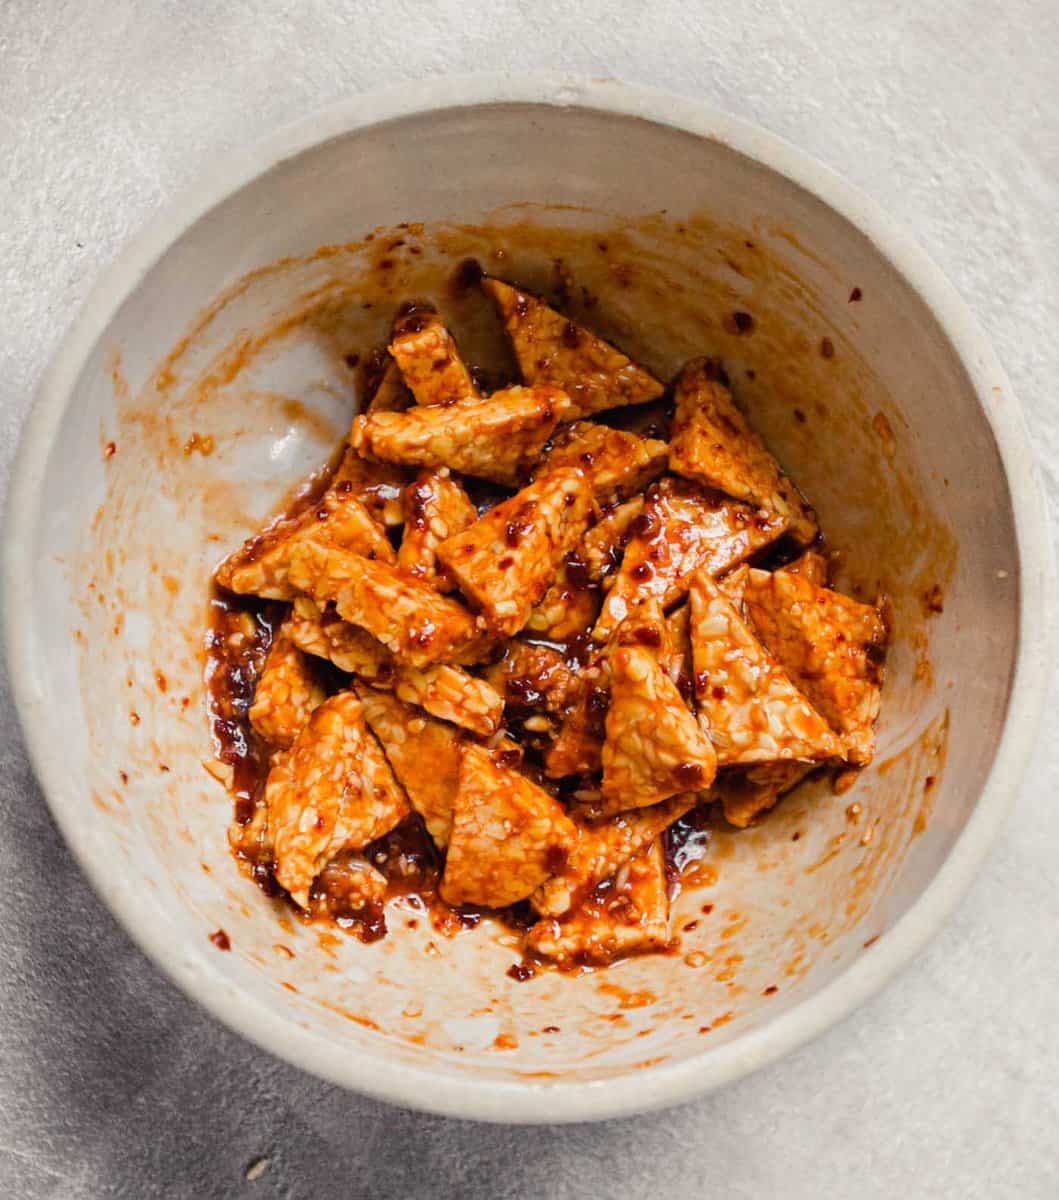 Photograph of tempeh marinated in a red sauce in a cream-colored bowl